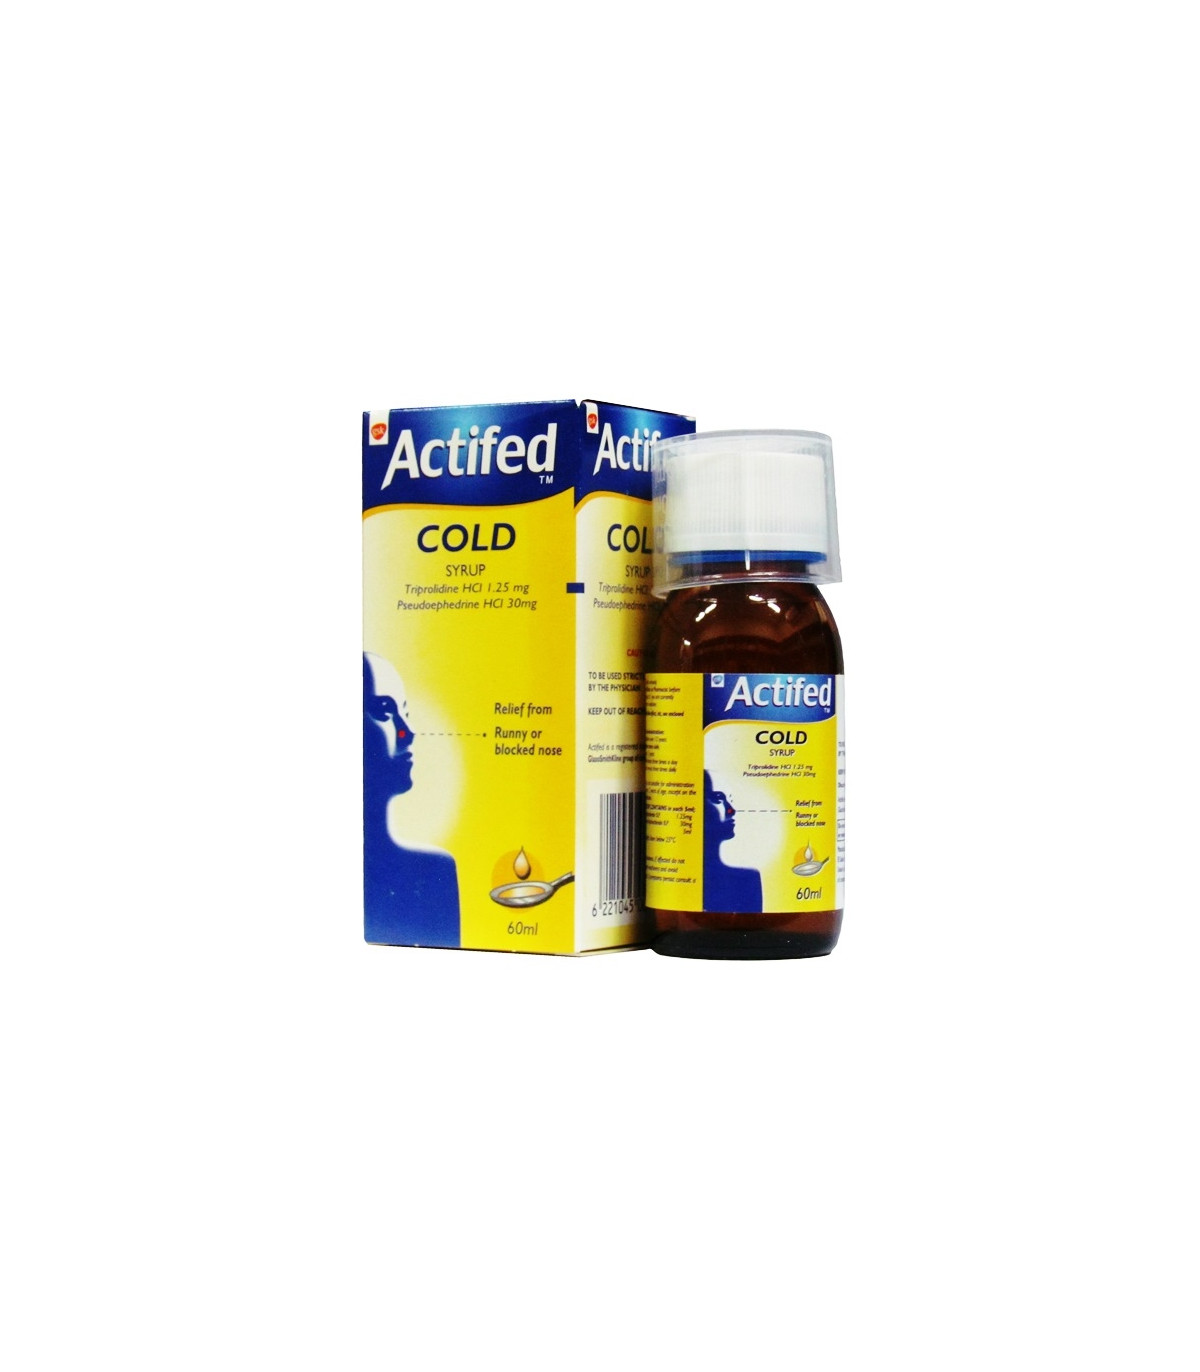 Actifed Cold Syrup - 60ml